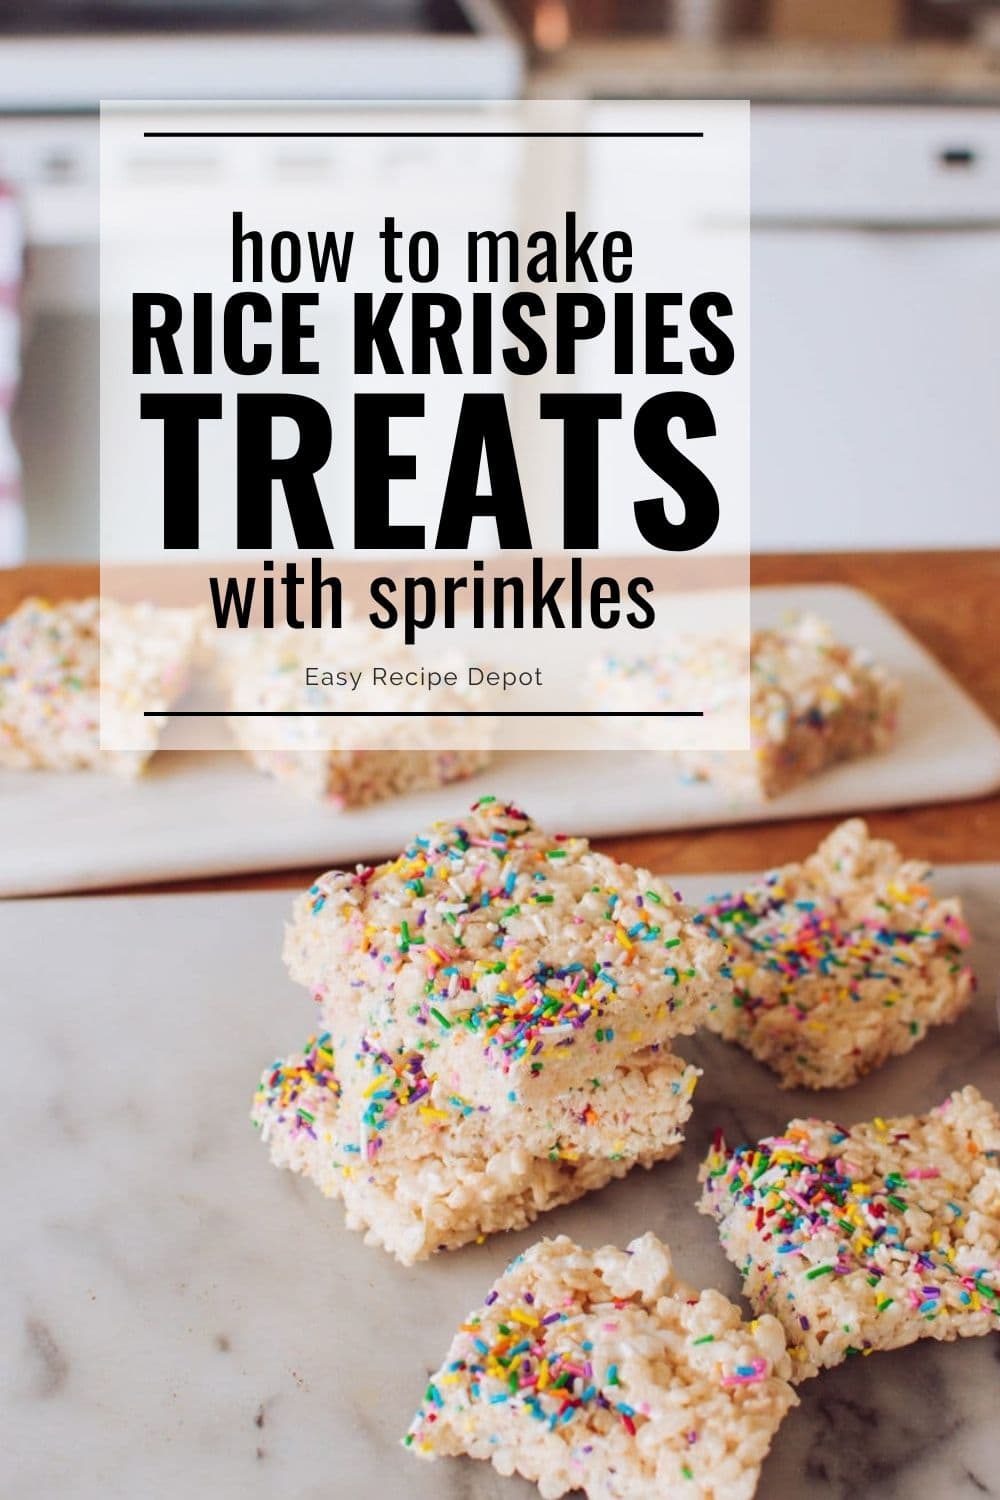 How to make Rice Krispies treats with sprinkles.